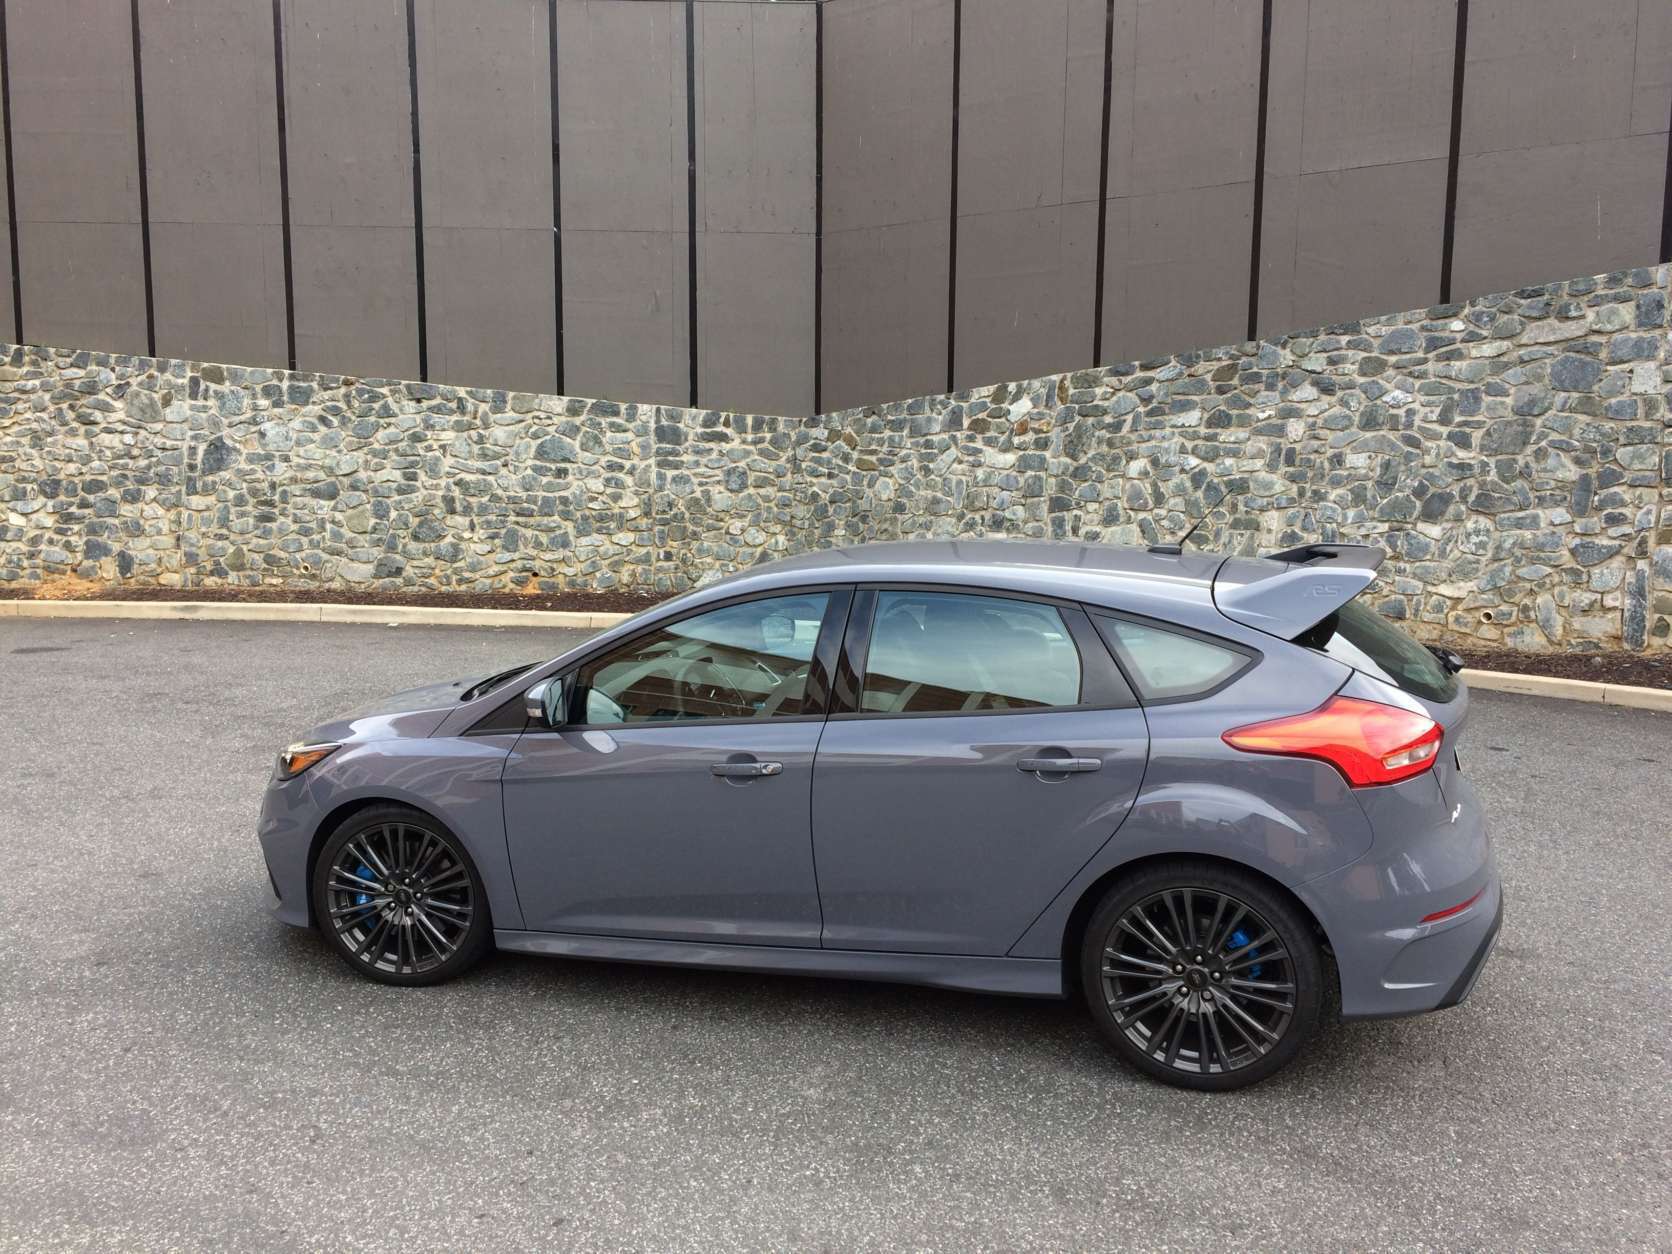 The Focus RS handles back roads like no other hot hatch. With great grip and high limits, this car is a speeding ticket waiting to happen, said Parris. Fuel economy was 21.5 mpg of premium near the 22 mpg mixed score. (WTOP/Mike Parris) 